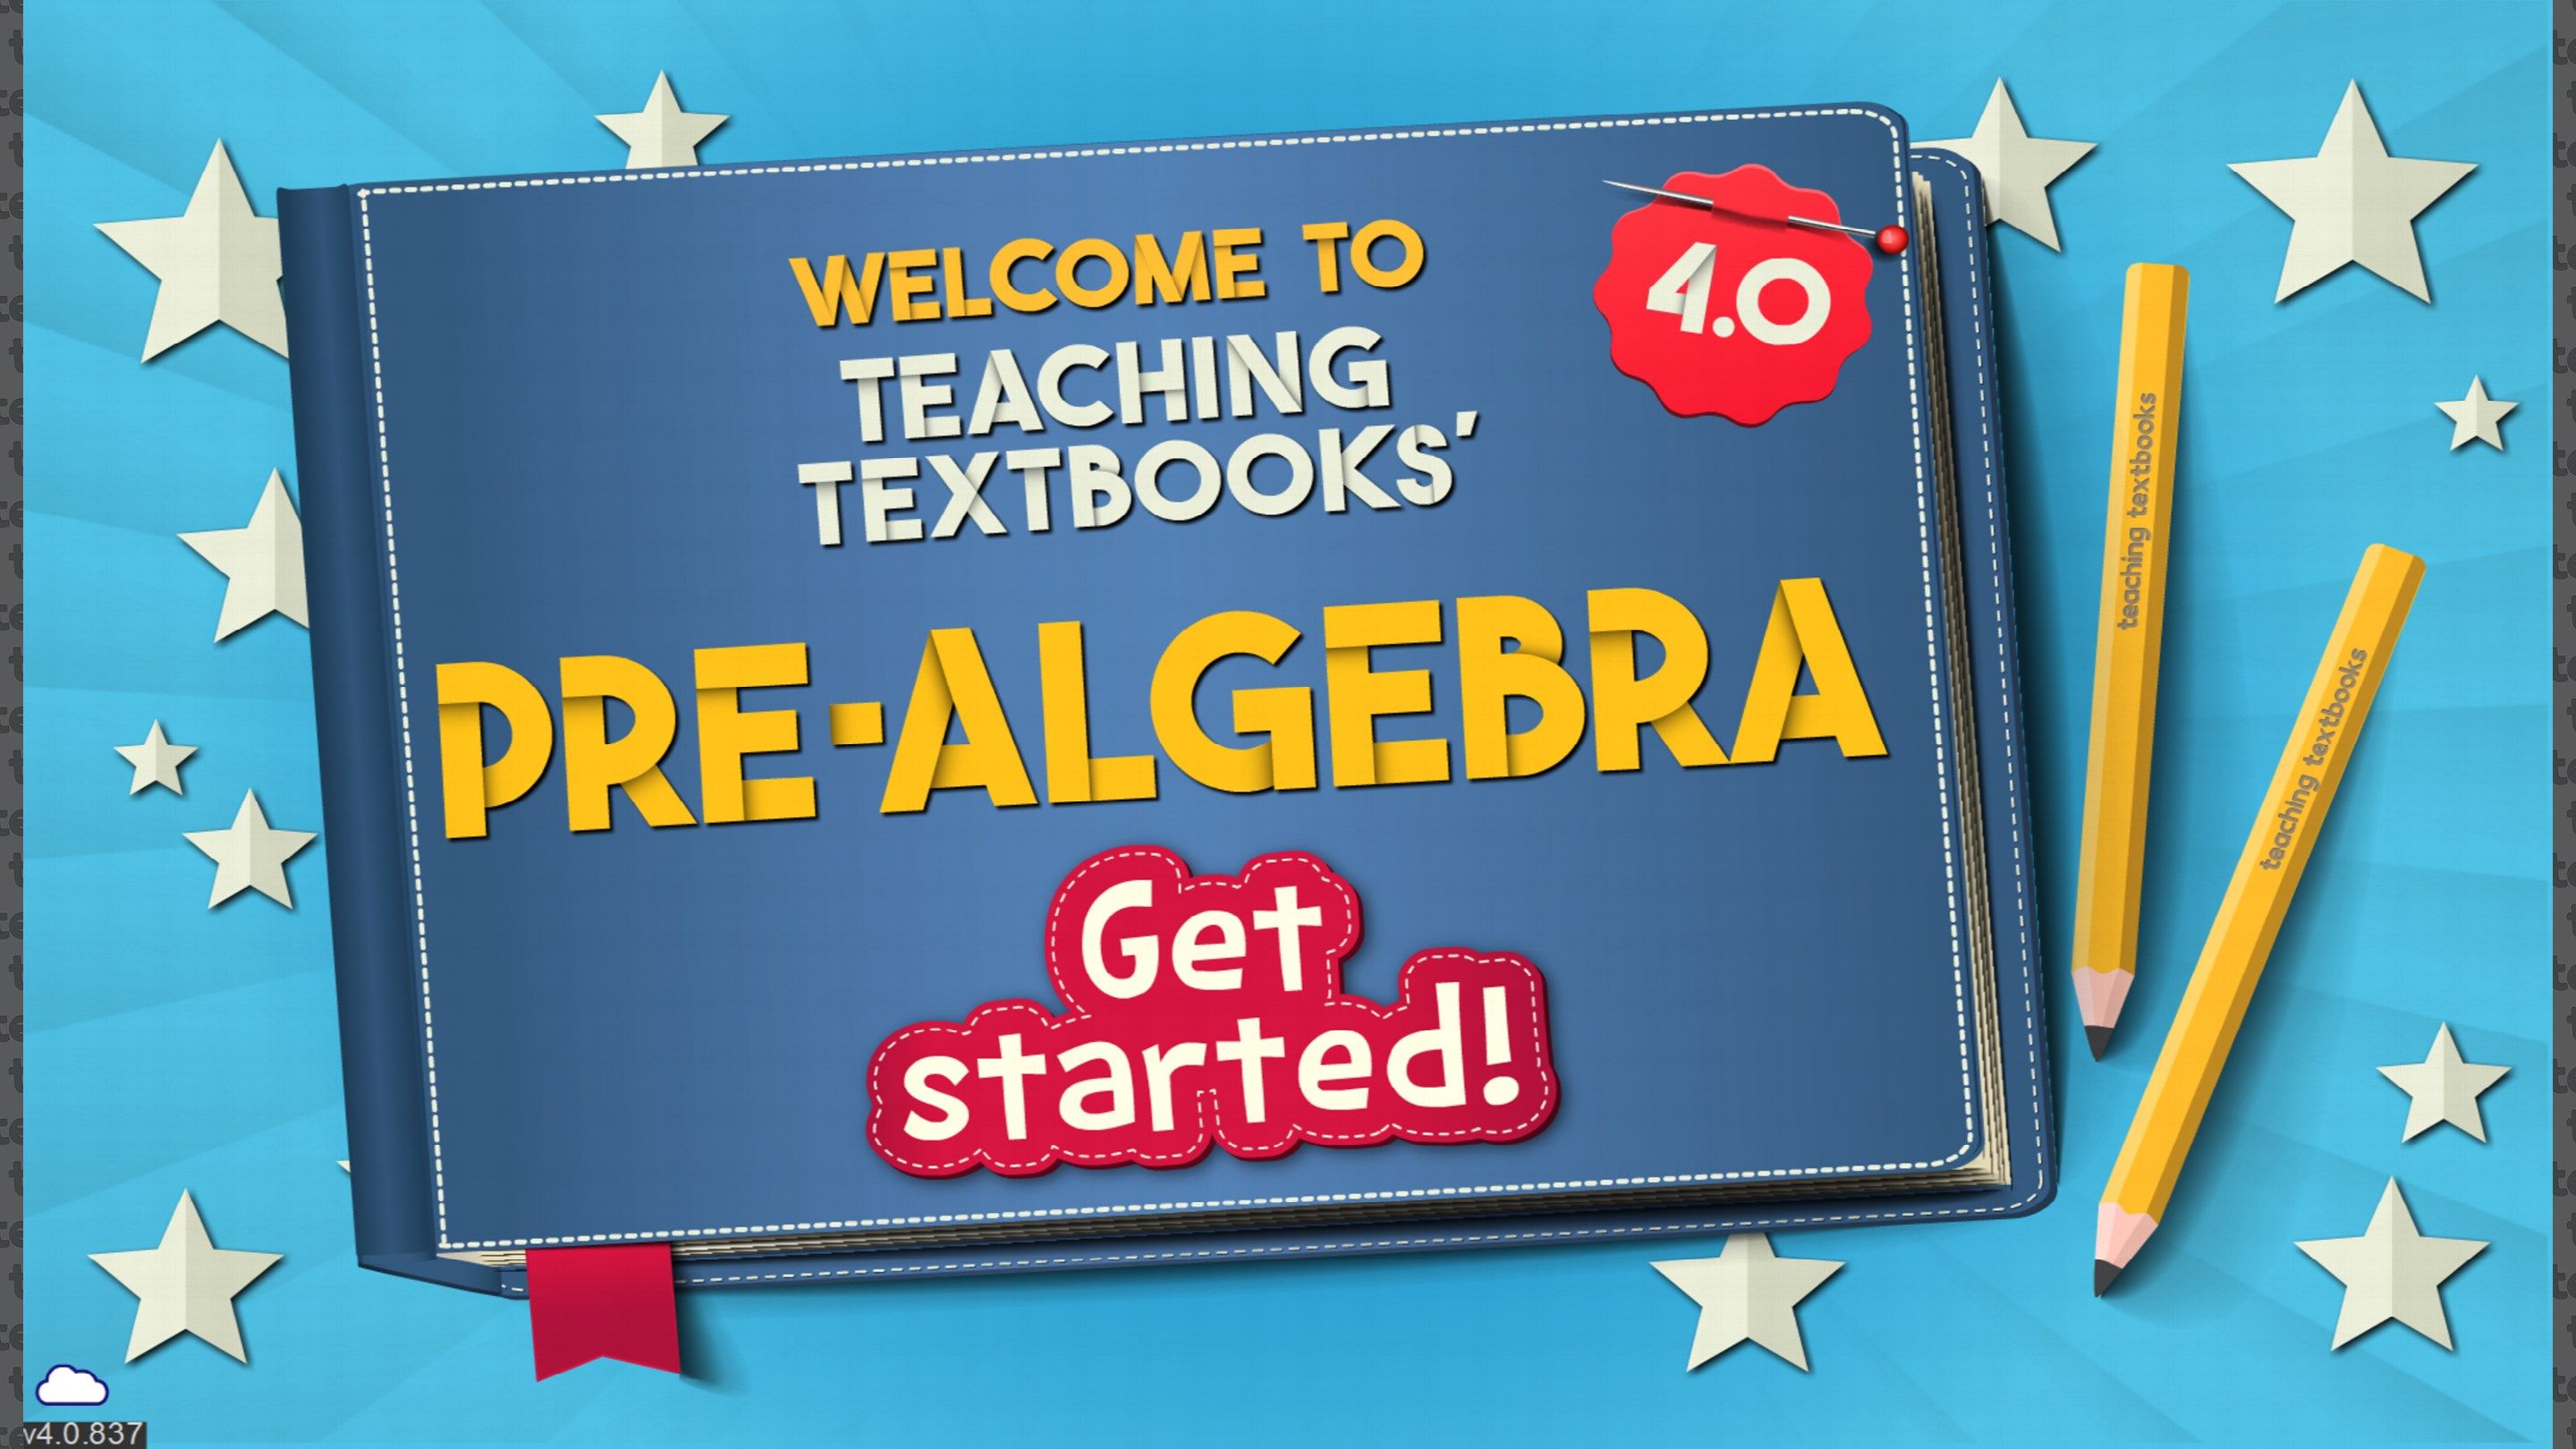 When the app launches, all you have to do to get started is log in with your Teaching Textbooks parent account, and it will connect to your Pre-Algebra enrollment.